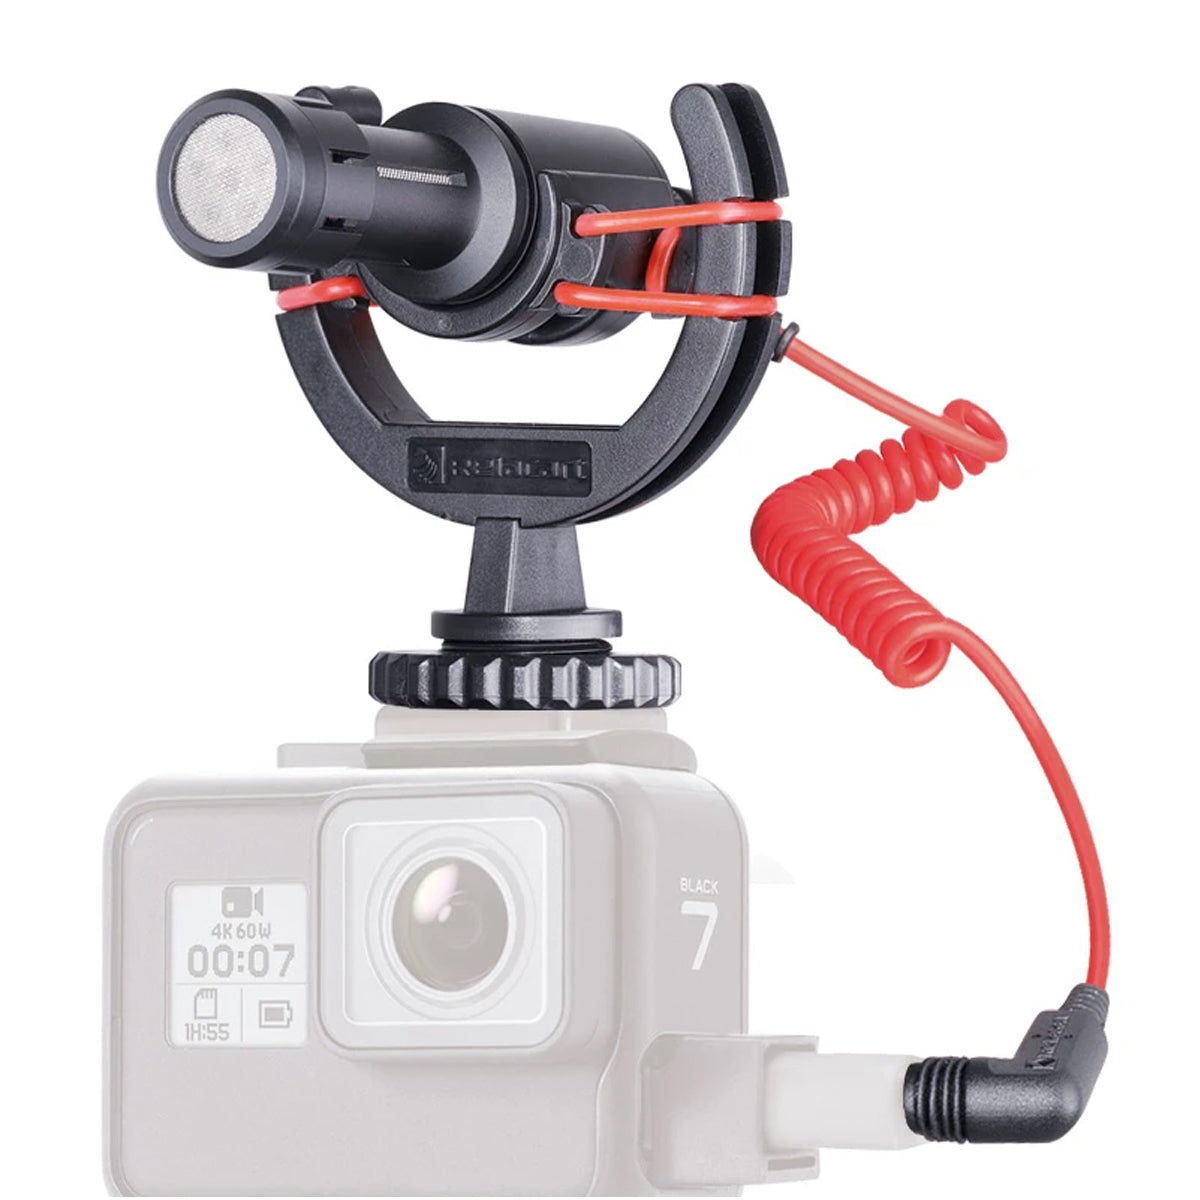 Shop and buy Relacart MU1 Directional Camera Microphone Rubber anti-vibration design Condenser| Casefactorie® online with great deals and sales prices with fast and safe shipping. Casefactorie is the largest Singapore official authorised retailer for the largest collection of mobile premium accessories.